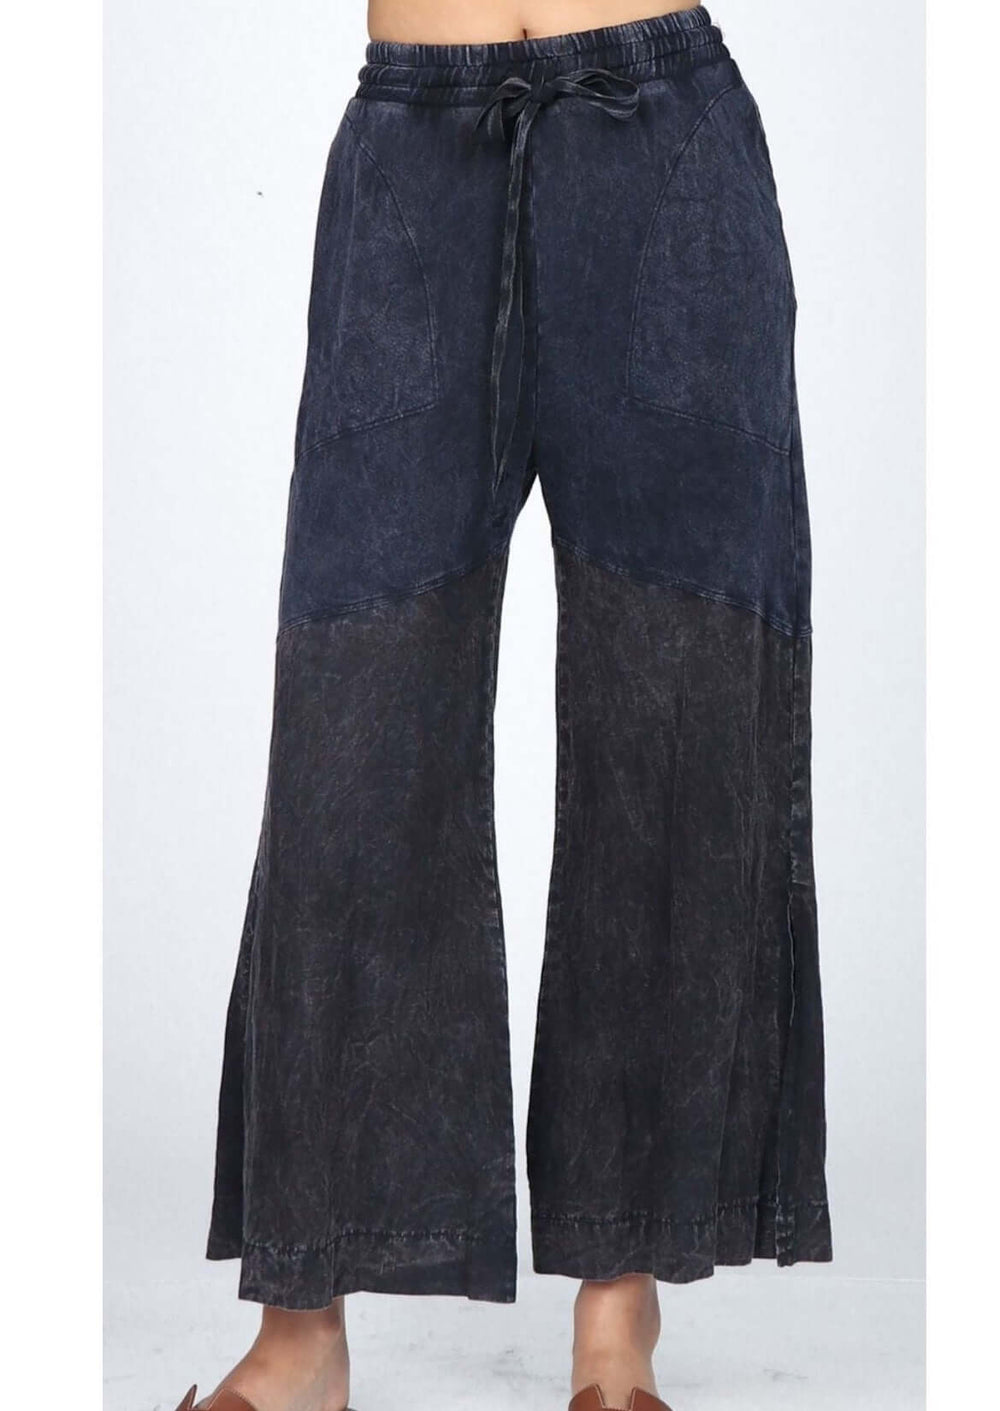 Women's Soft High Waist Solid Color Gaucho Pants – COTTON KITTY